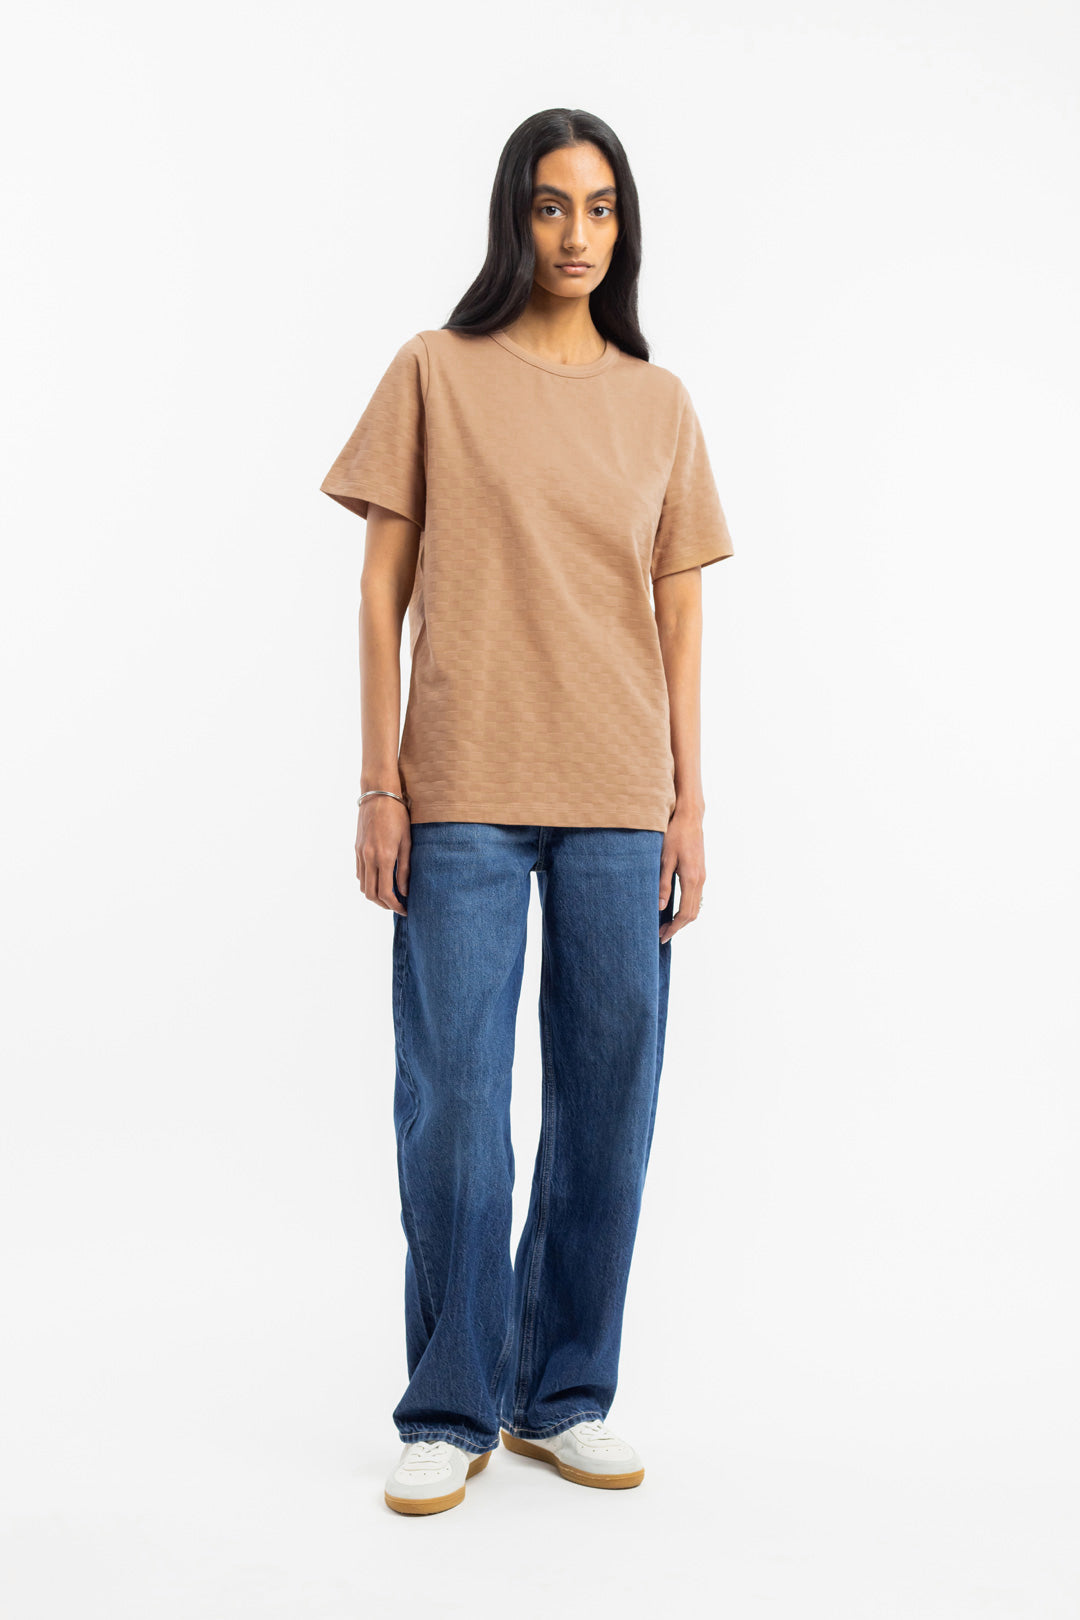 Caramel-colored T-shirt made of 100% organic cotton by Rotholz